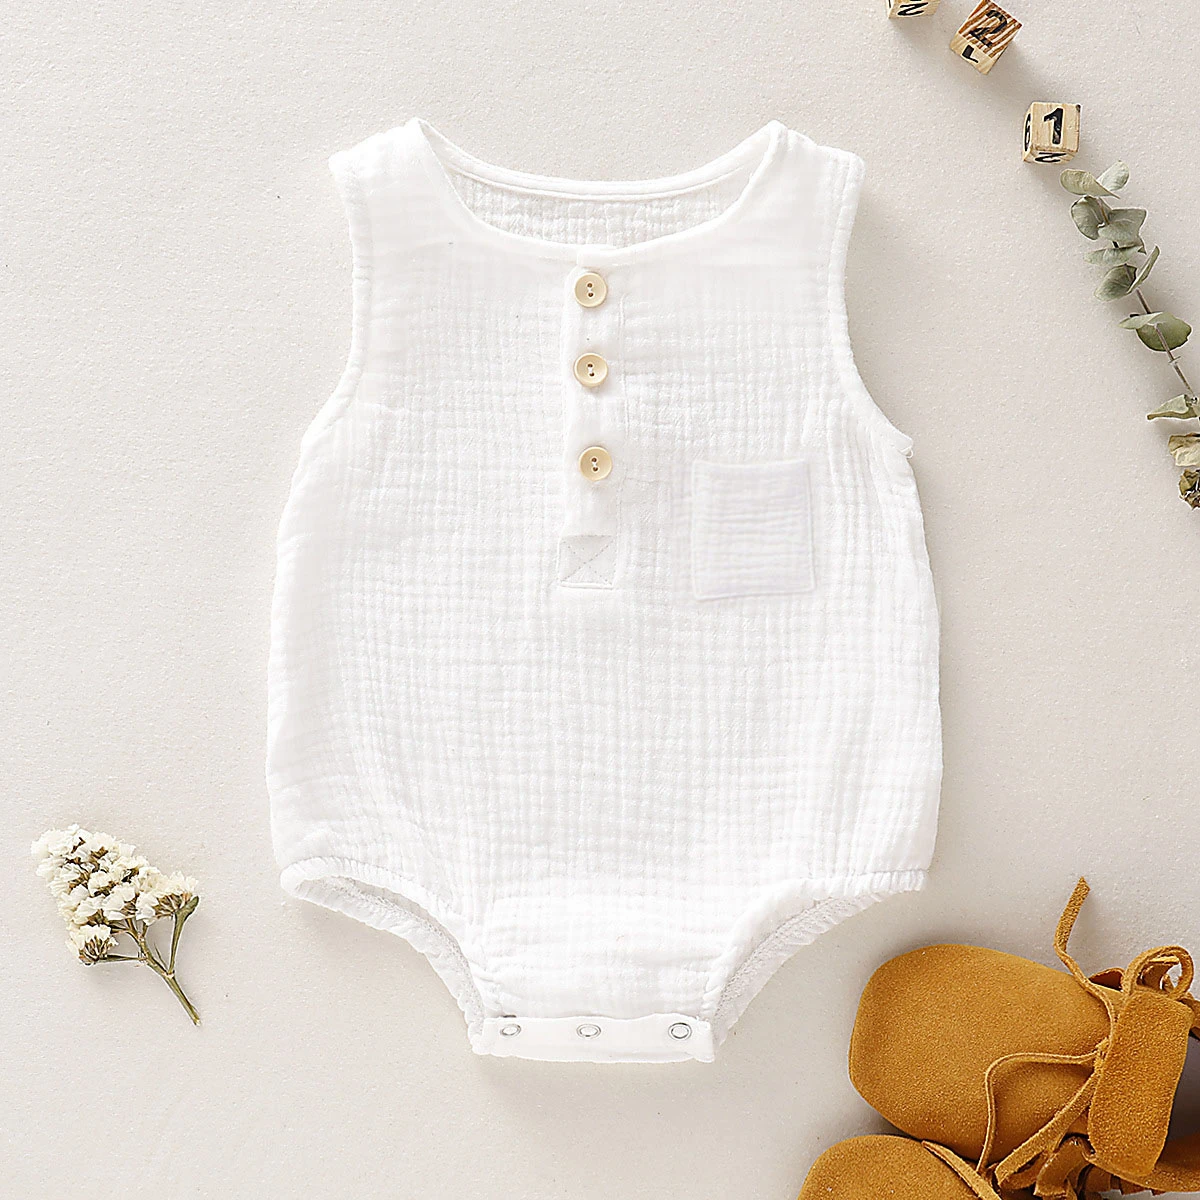 2022 Summer Baby Rompers Boys Girls Bodysuit Muslin Sleeveless Newborn Clothes Fashion Baby Clothing cool baby bodysuits	